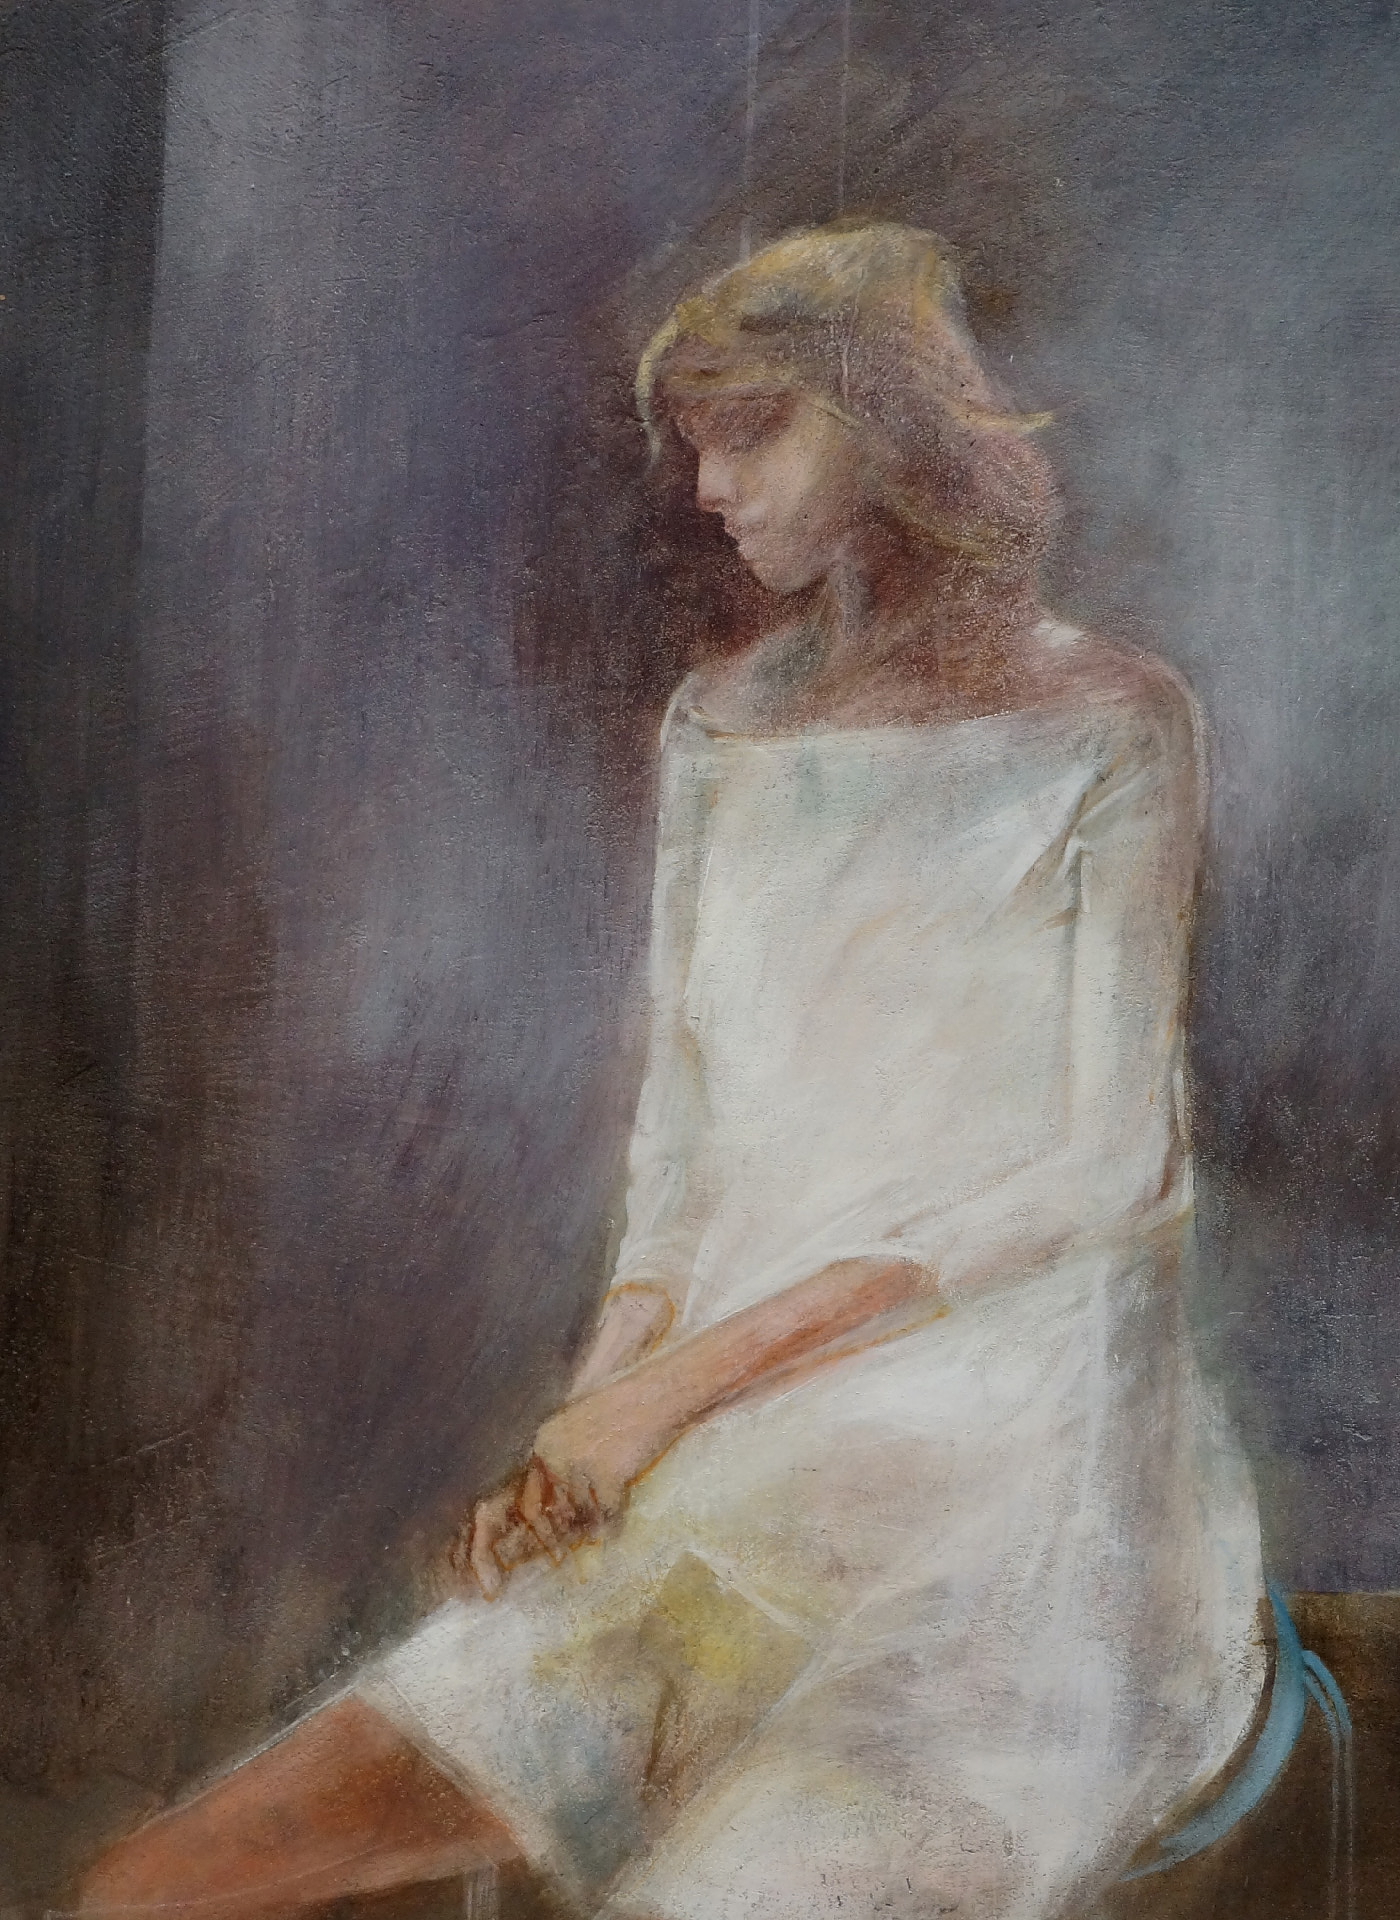 a painting of a woman sitting down looking down